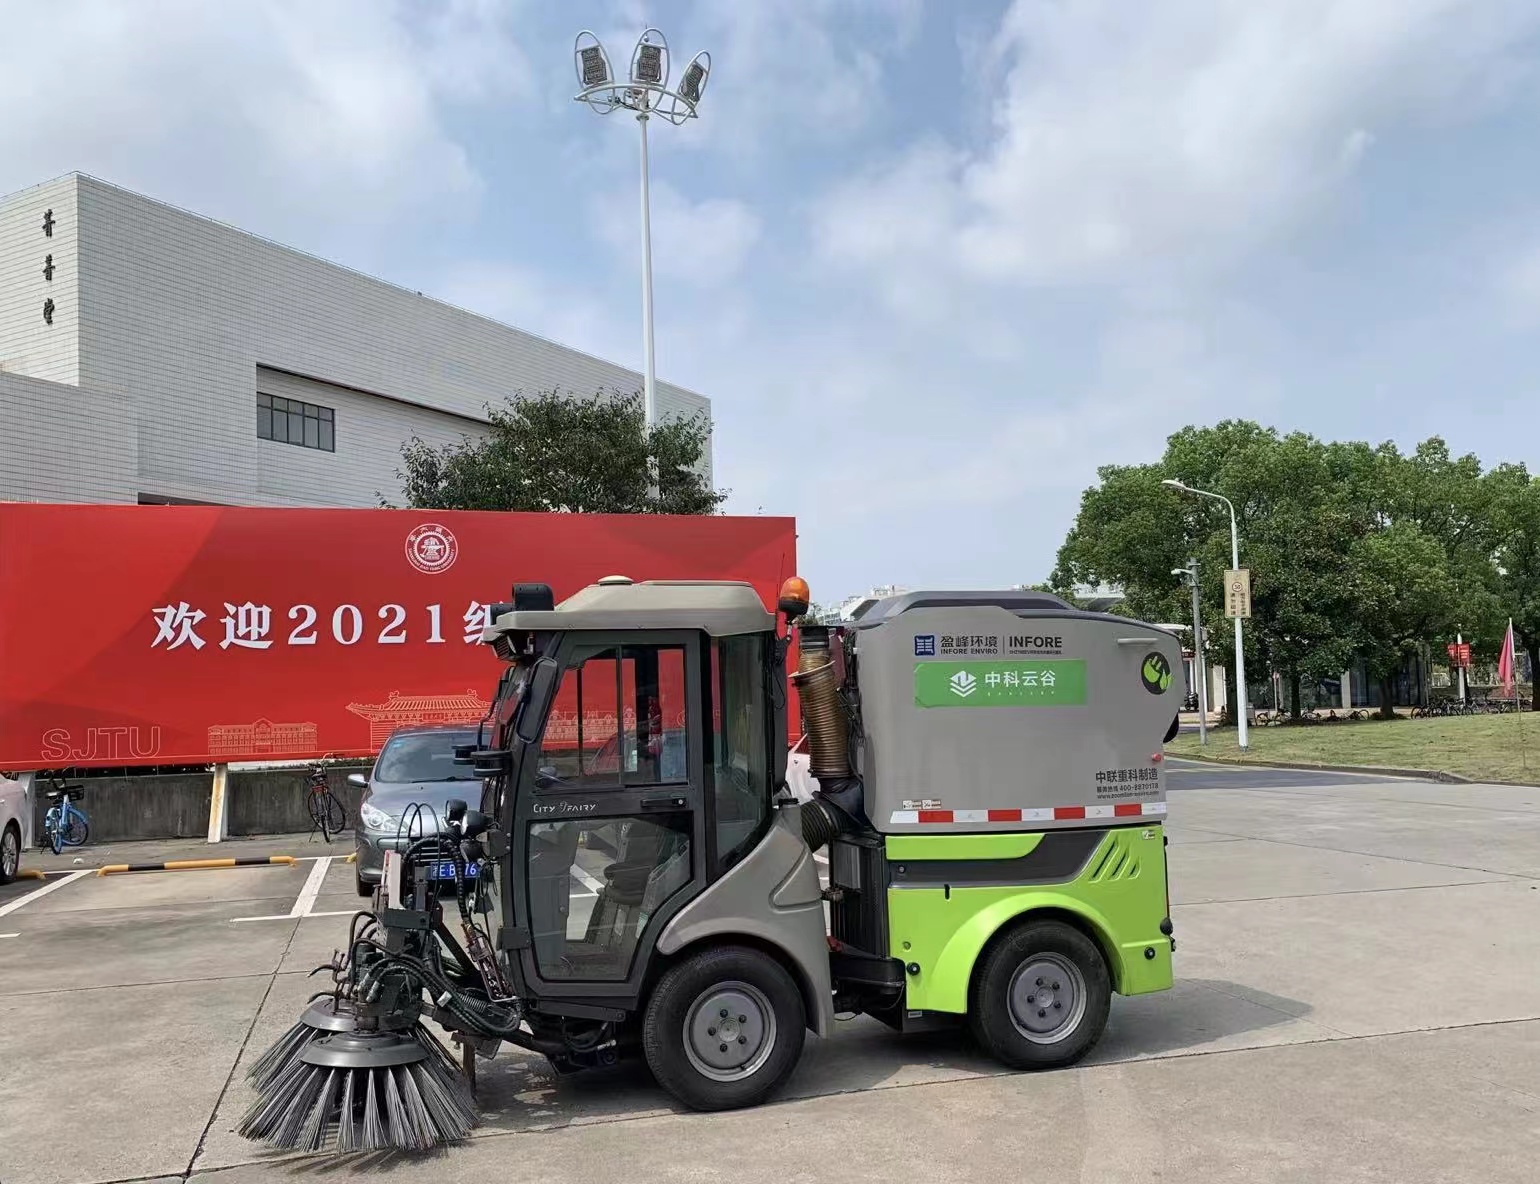 5G unmanned-driving new energy sanitation vehicle first appeared in 